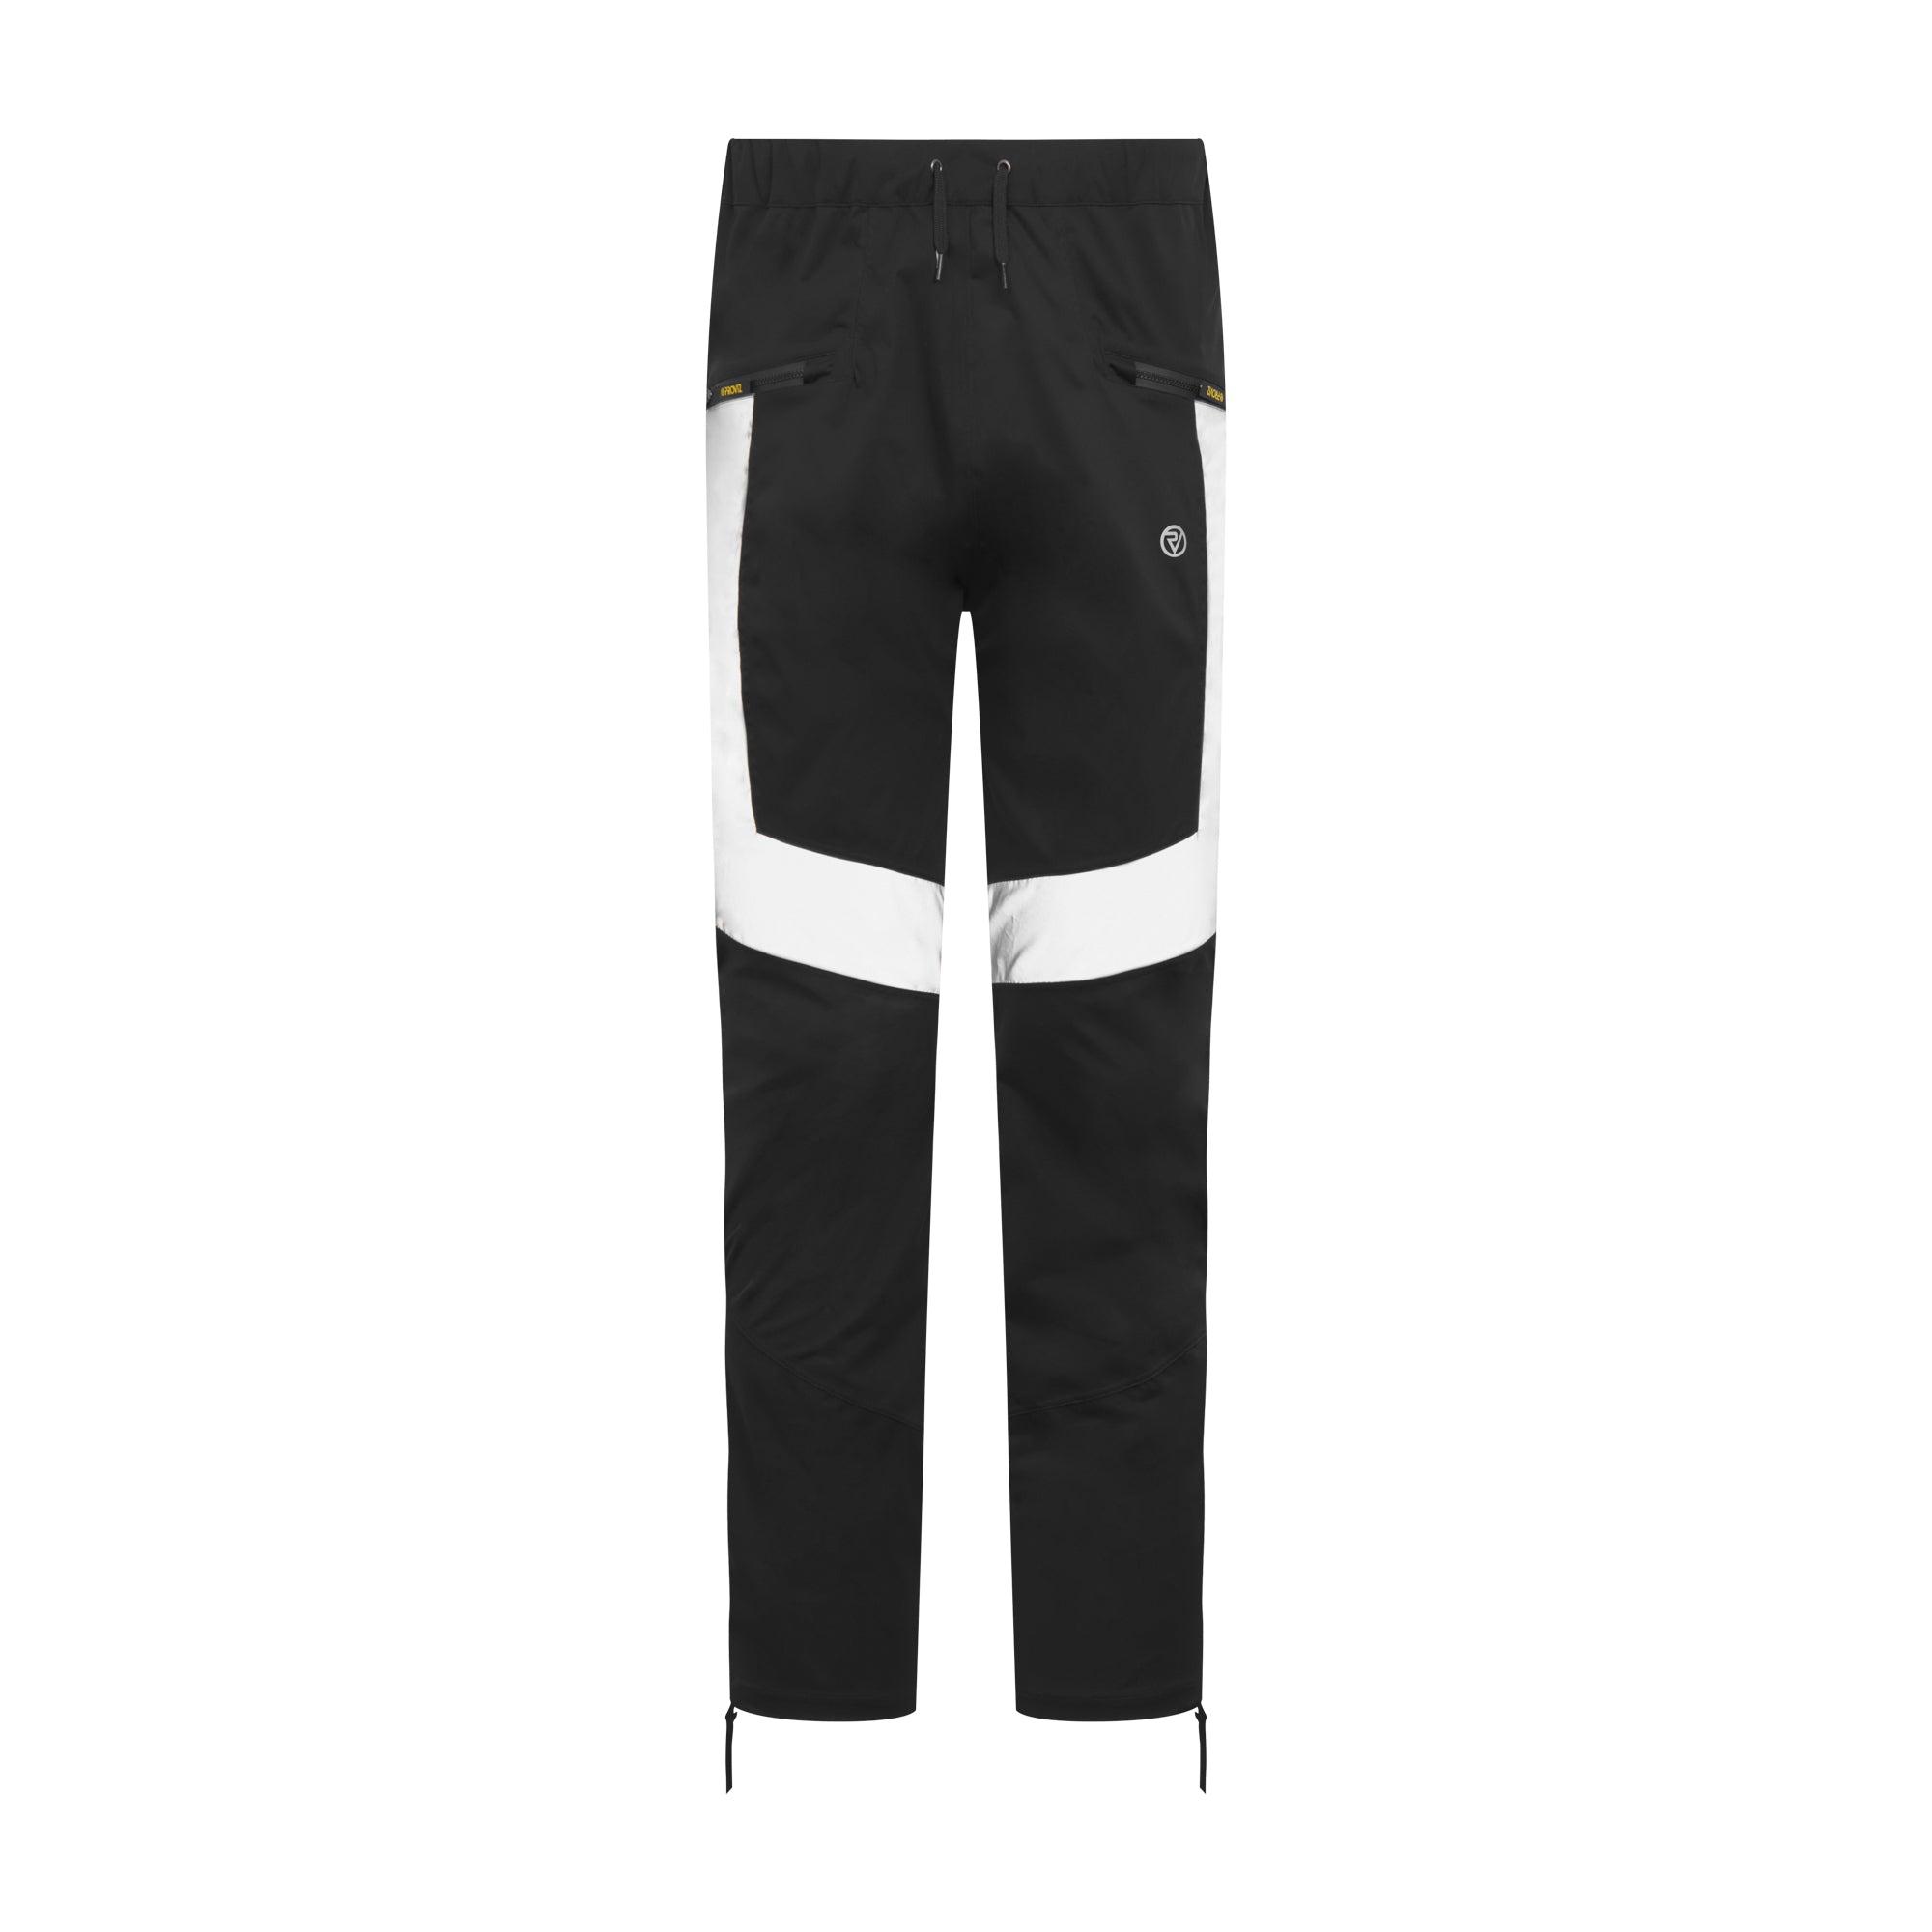 swrve cycling trousers